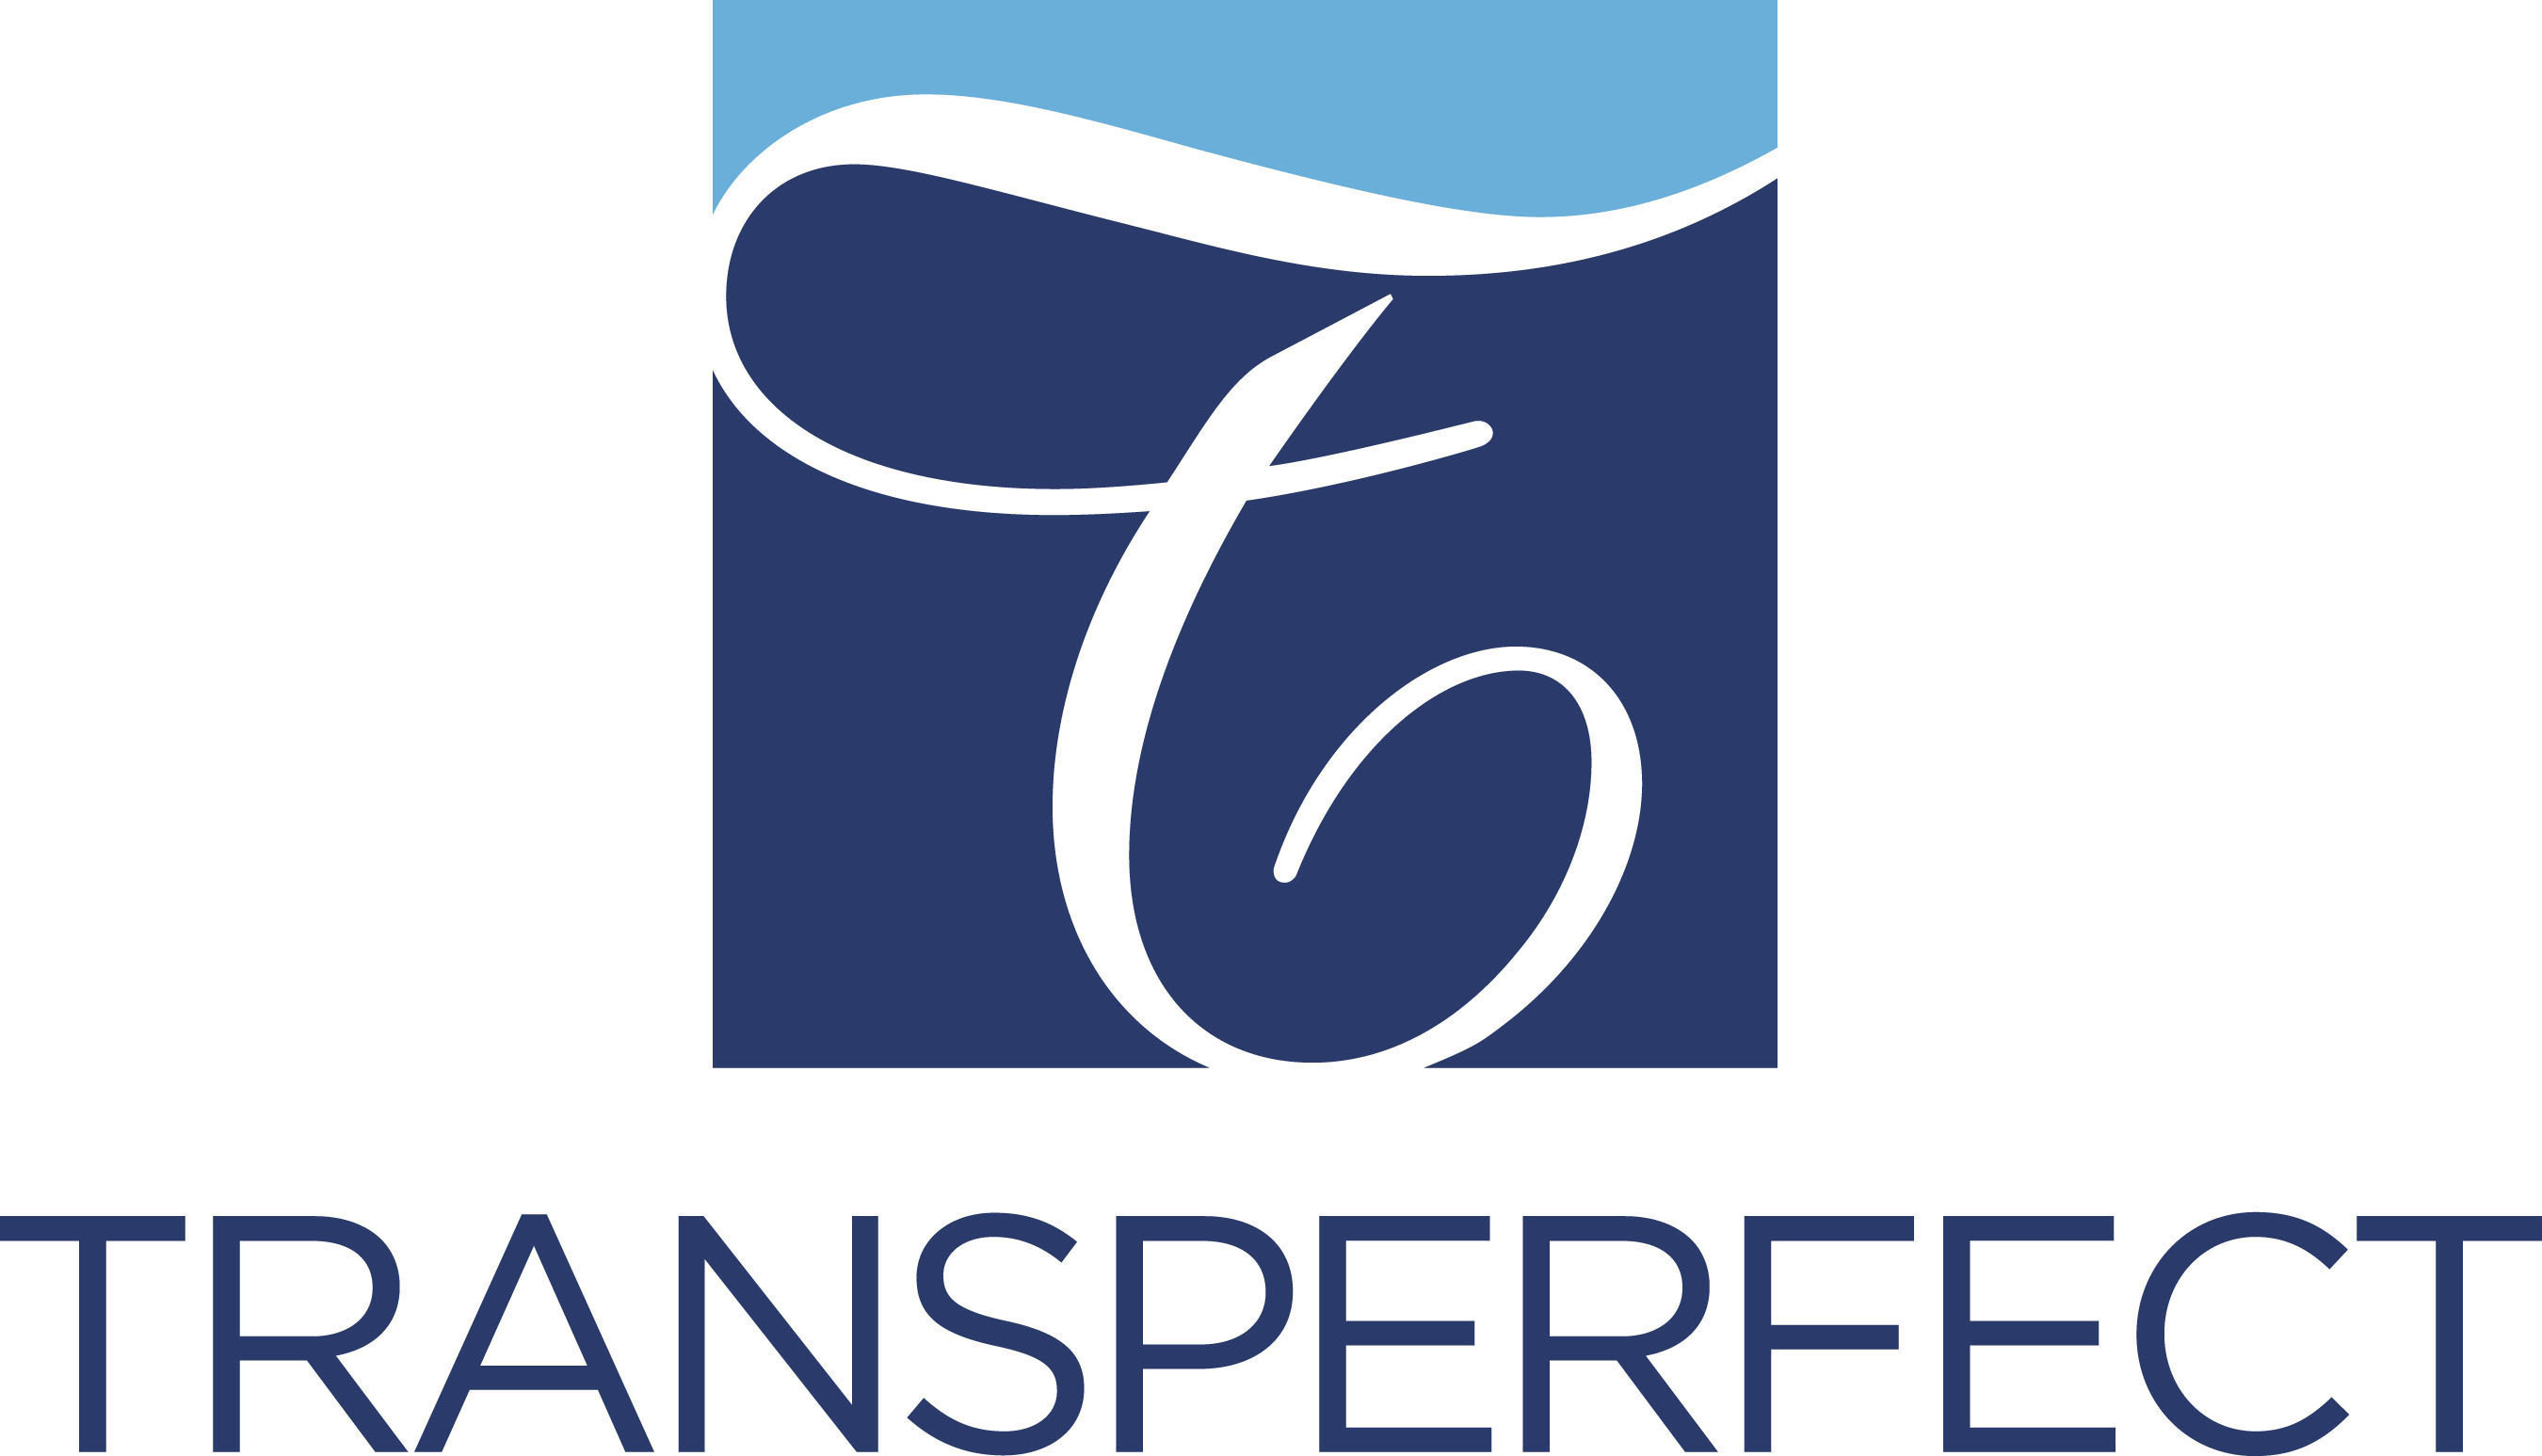 TransPerfect is the world's largest privately held provider of language and technology solutions. (PRNewsFoto/TransPerfect) (PRNewsFoto/TransPerfect)